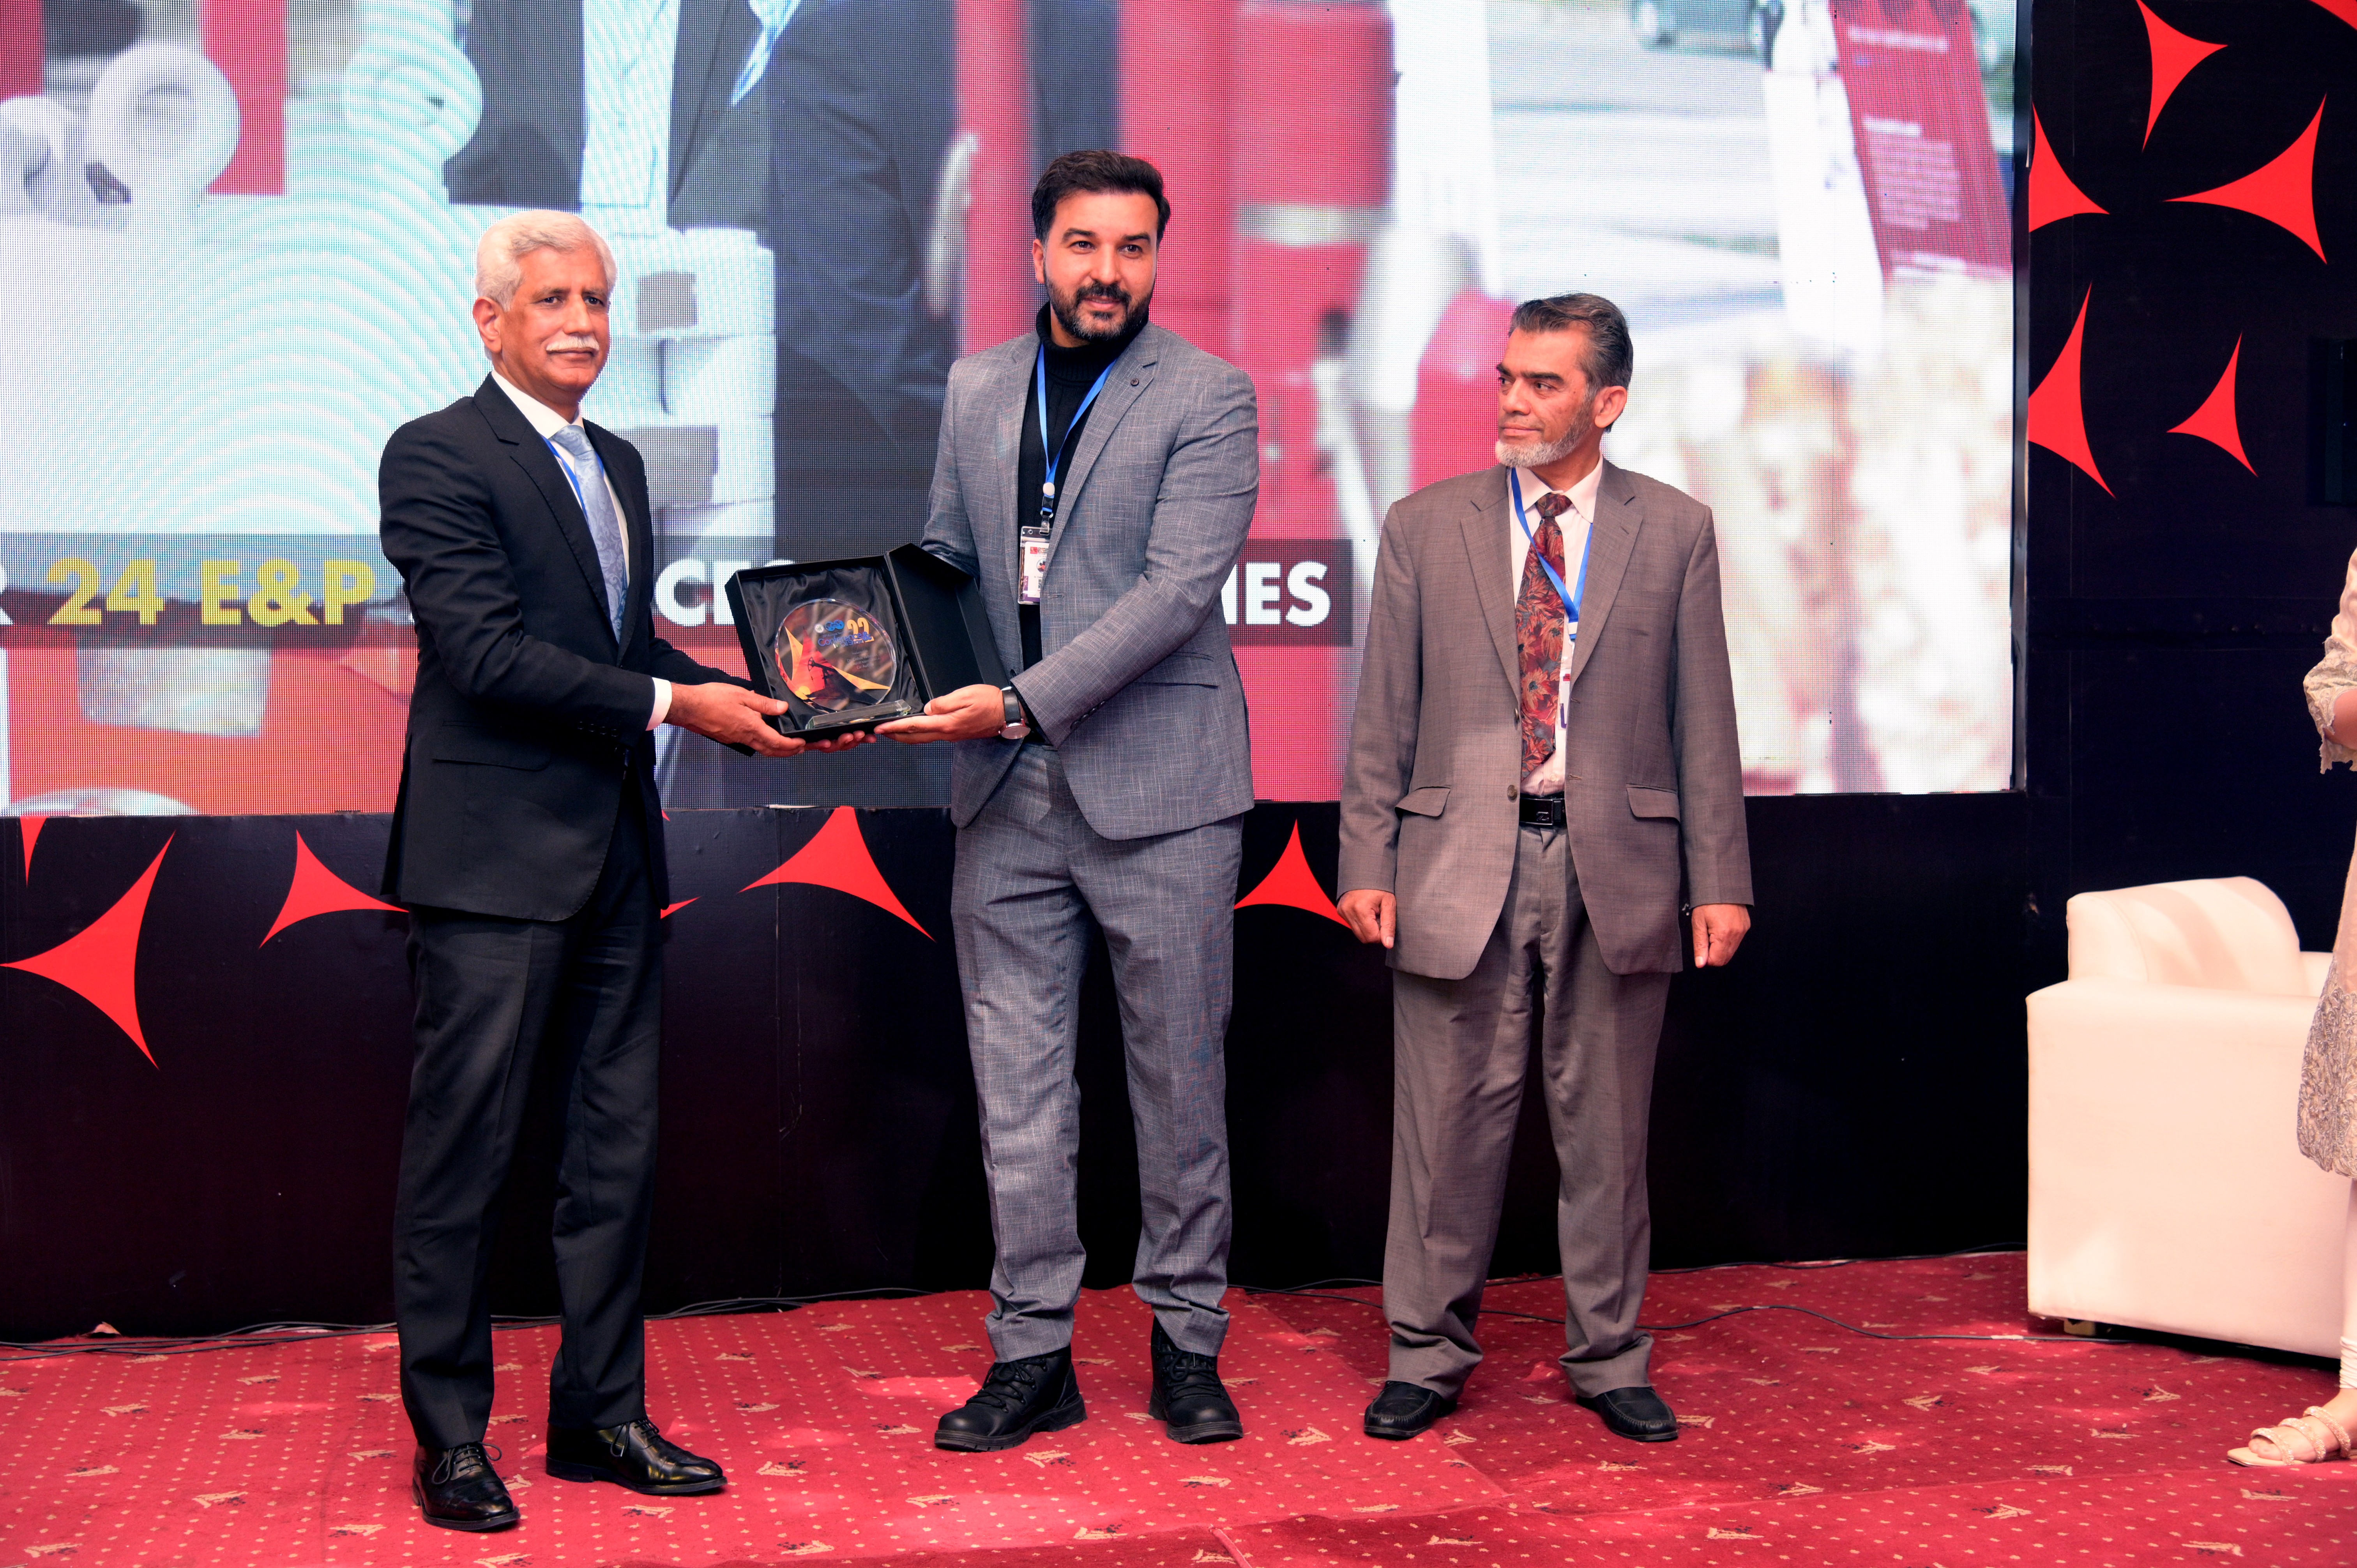 shields distribution ceremony to the participants at the event of conference and oil show